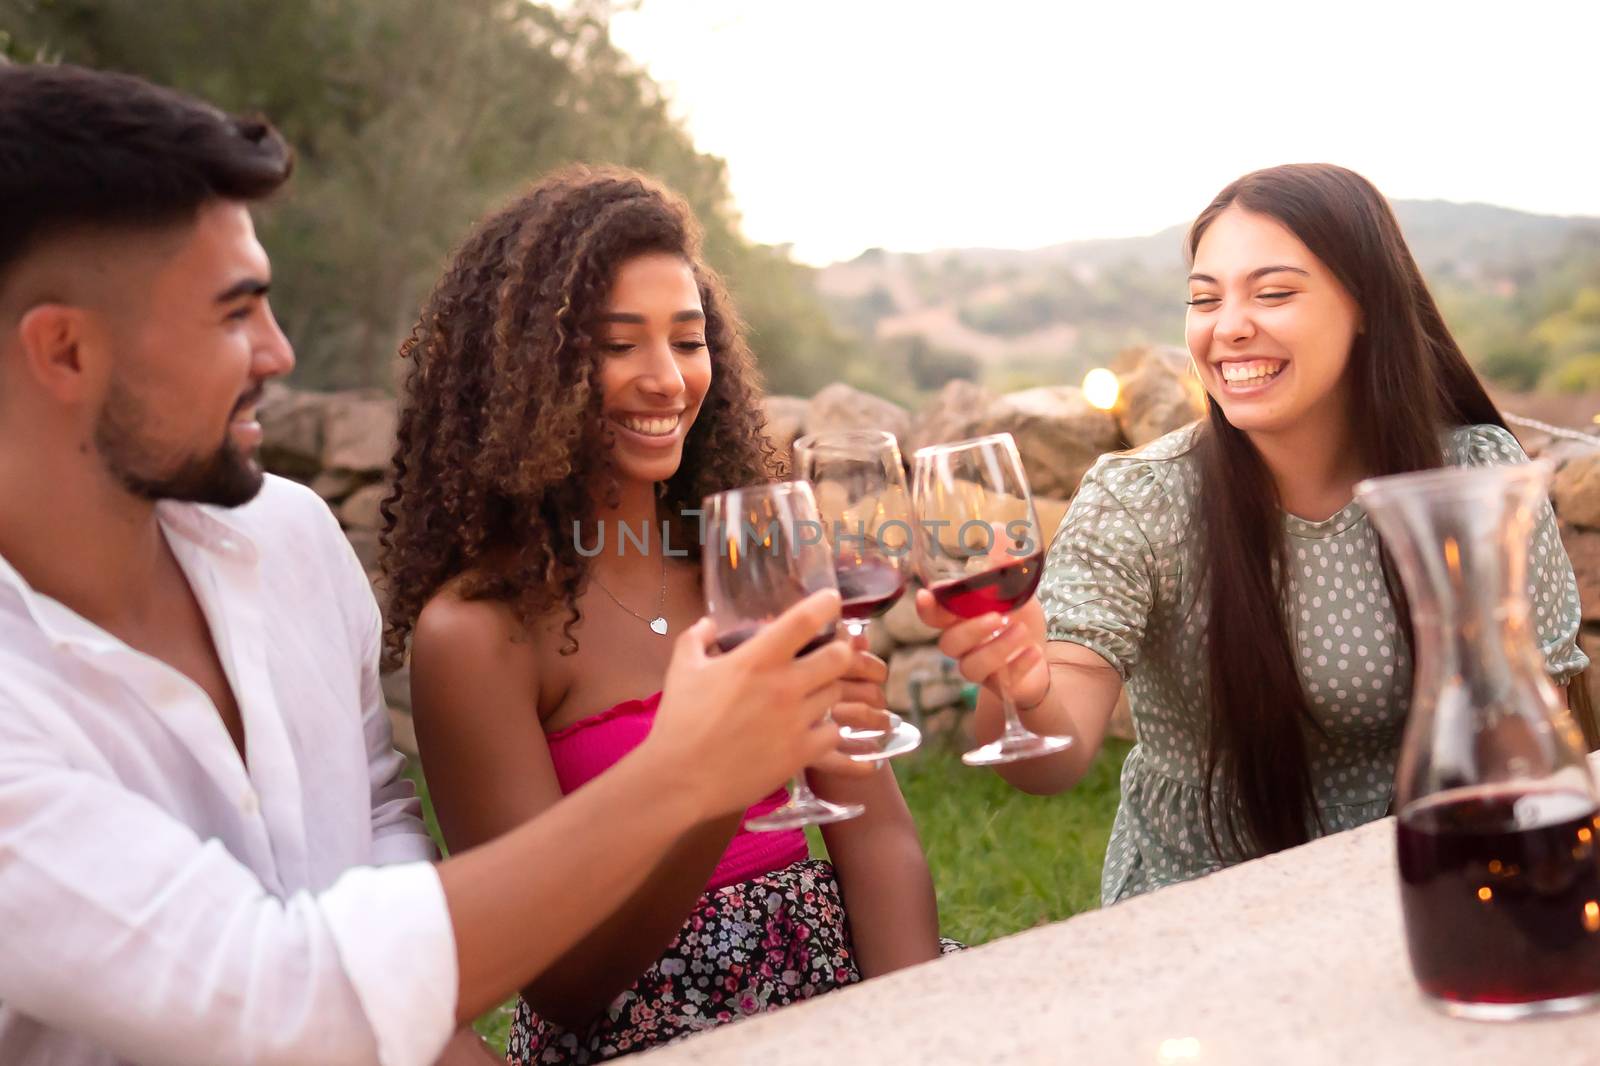 Three friends clinking glasses outdoor at sunset - Mixed race person group toasting with red wine glasses in countryside for the vineyard harvest end in Tuscany - Vintage look photograph by robbyfontanesi